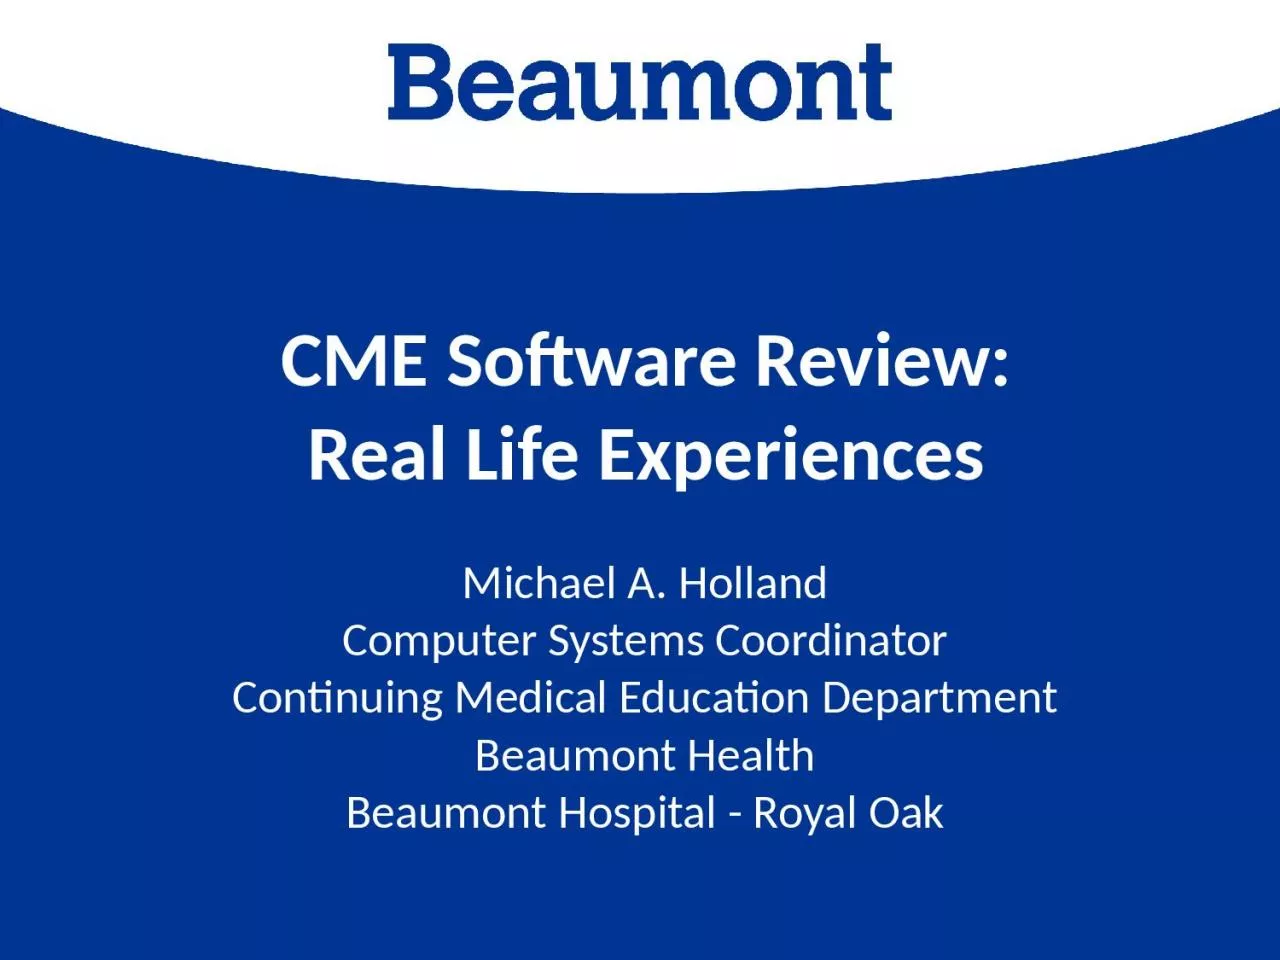 CME Software Review: Real Life Experiences